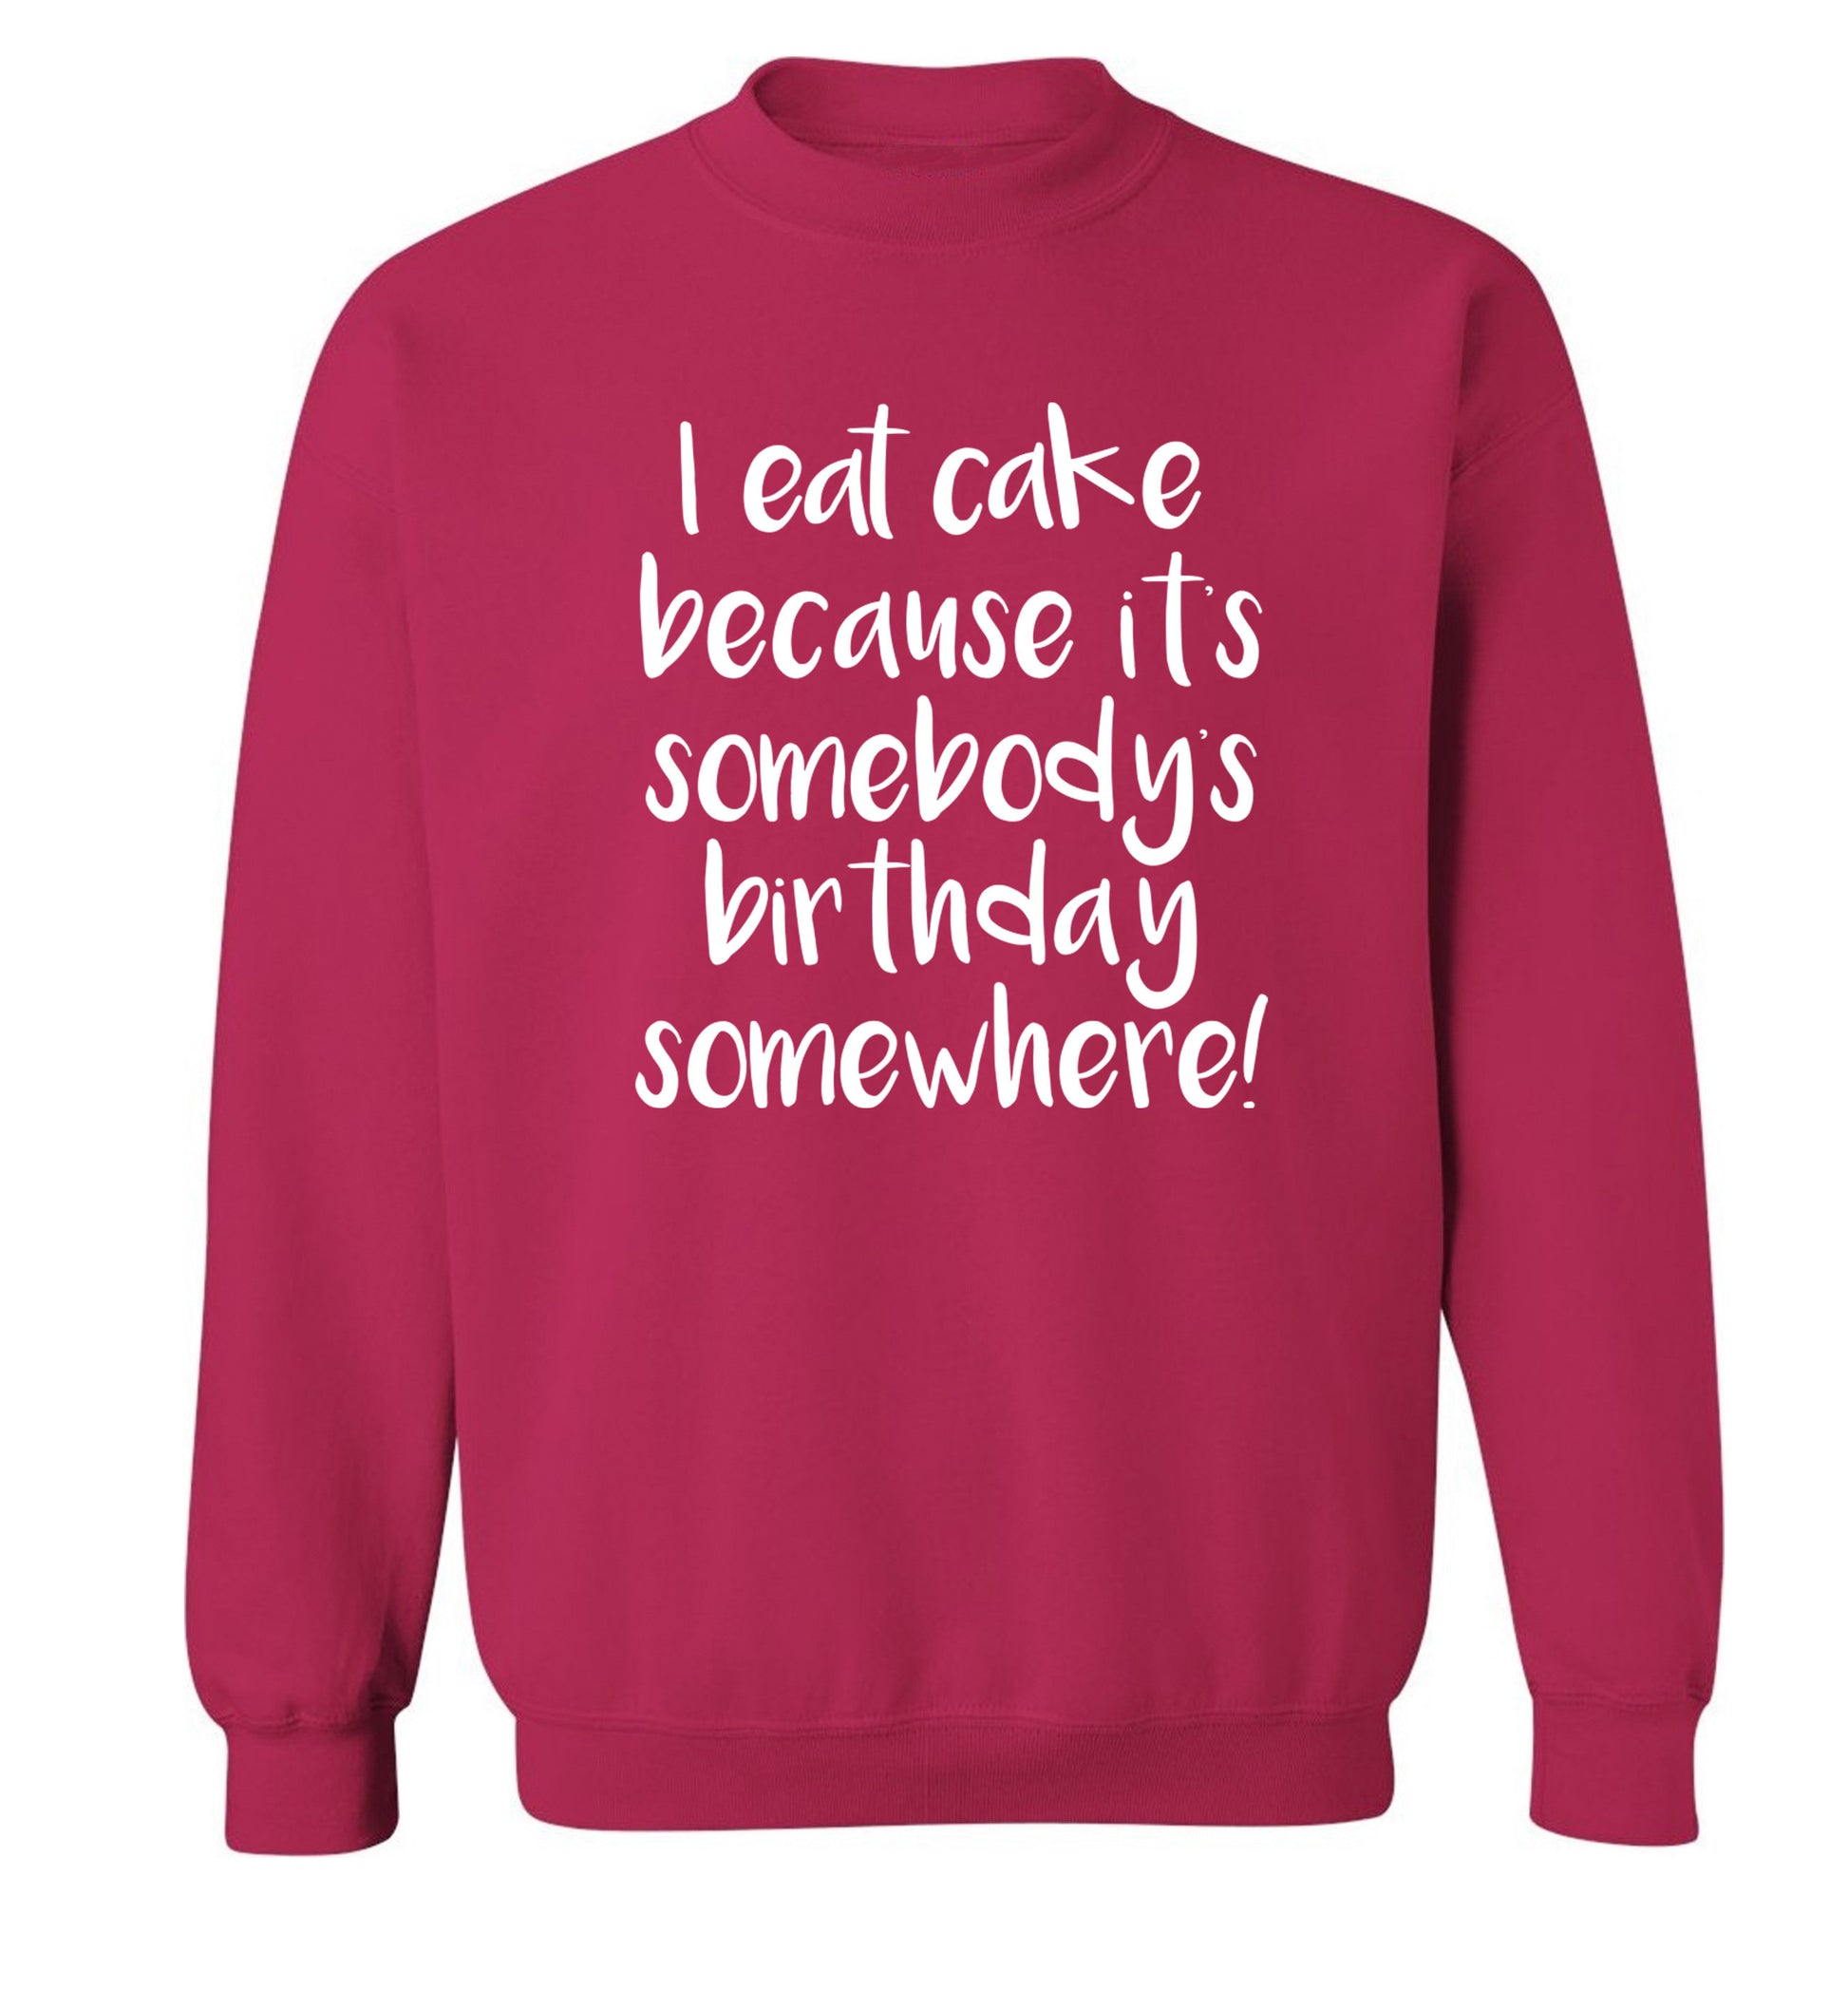 I eat cake because it's somebody's birthday somewhere! Adult's unisex pink Sweater 2XL